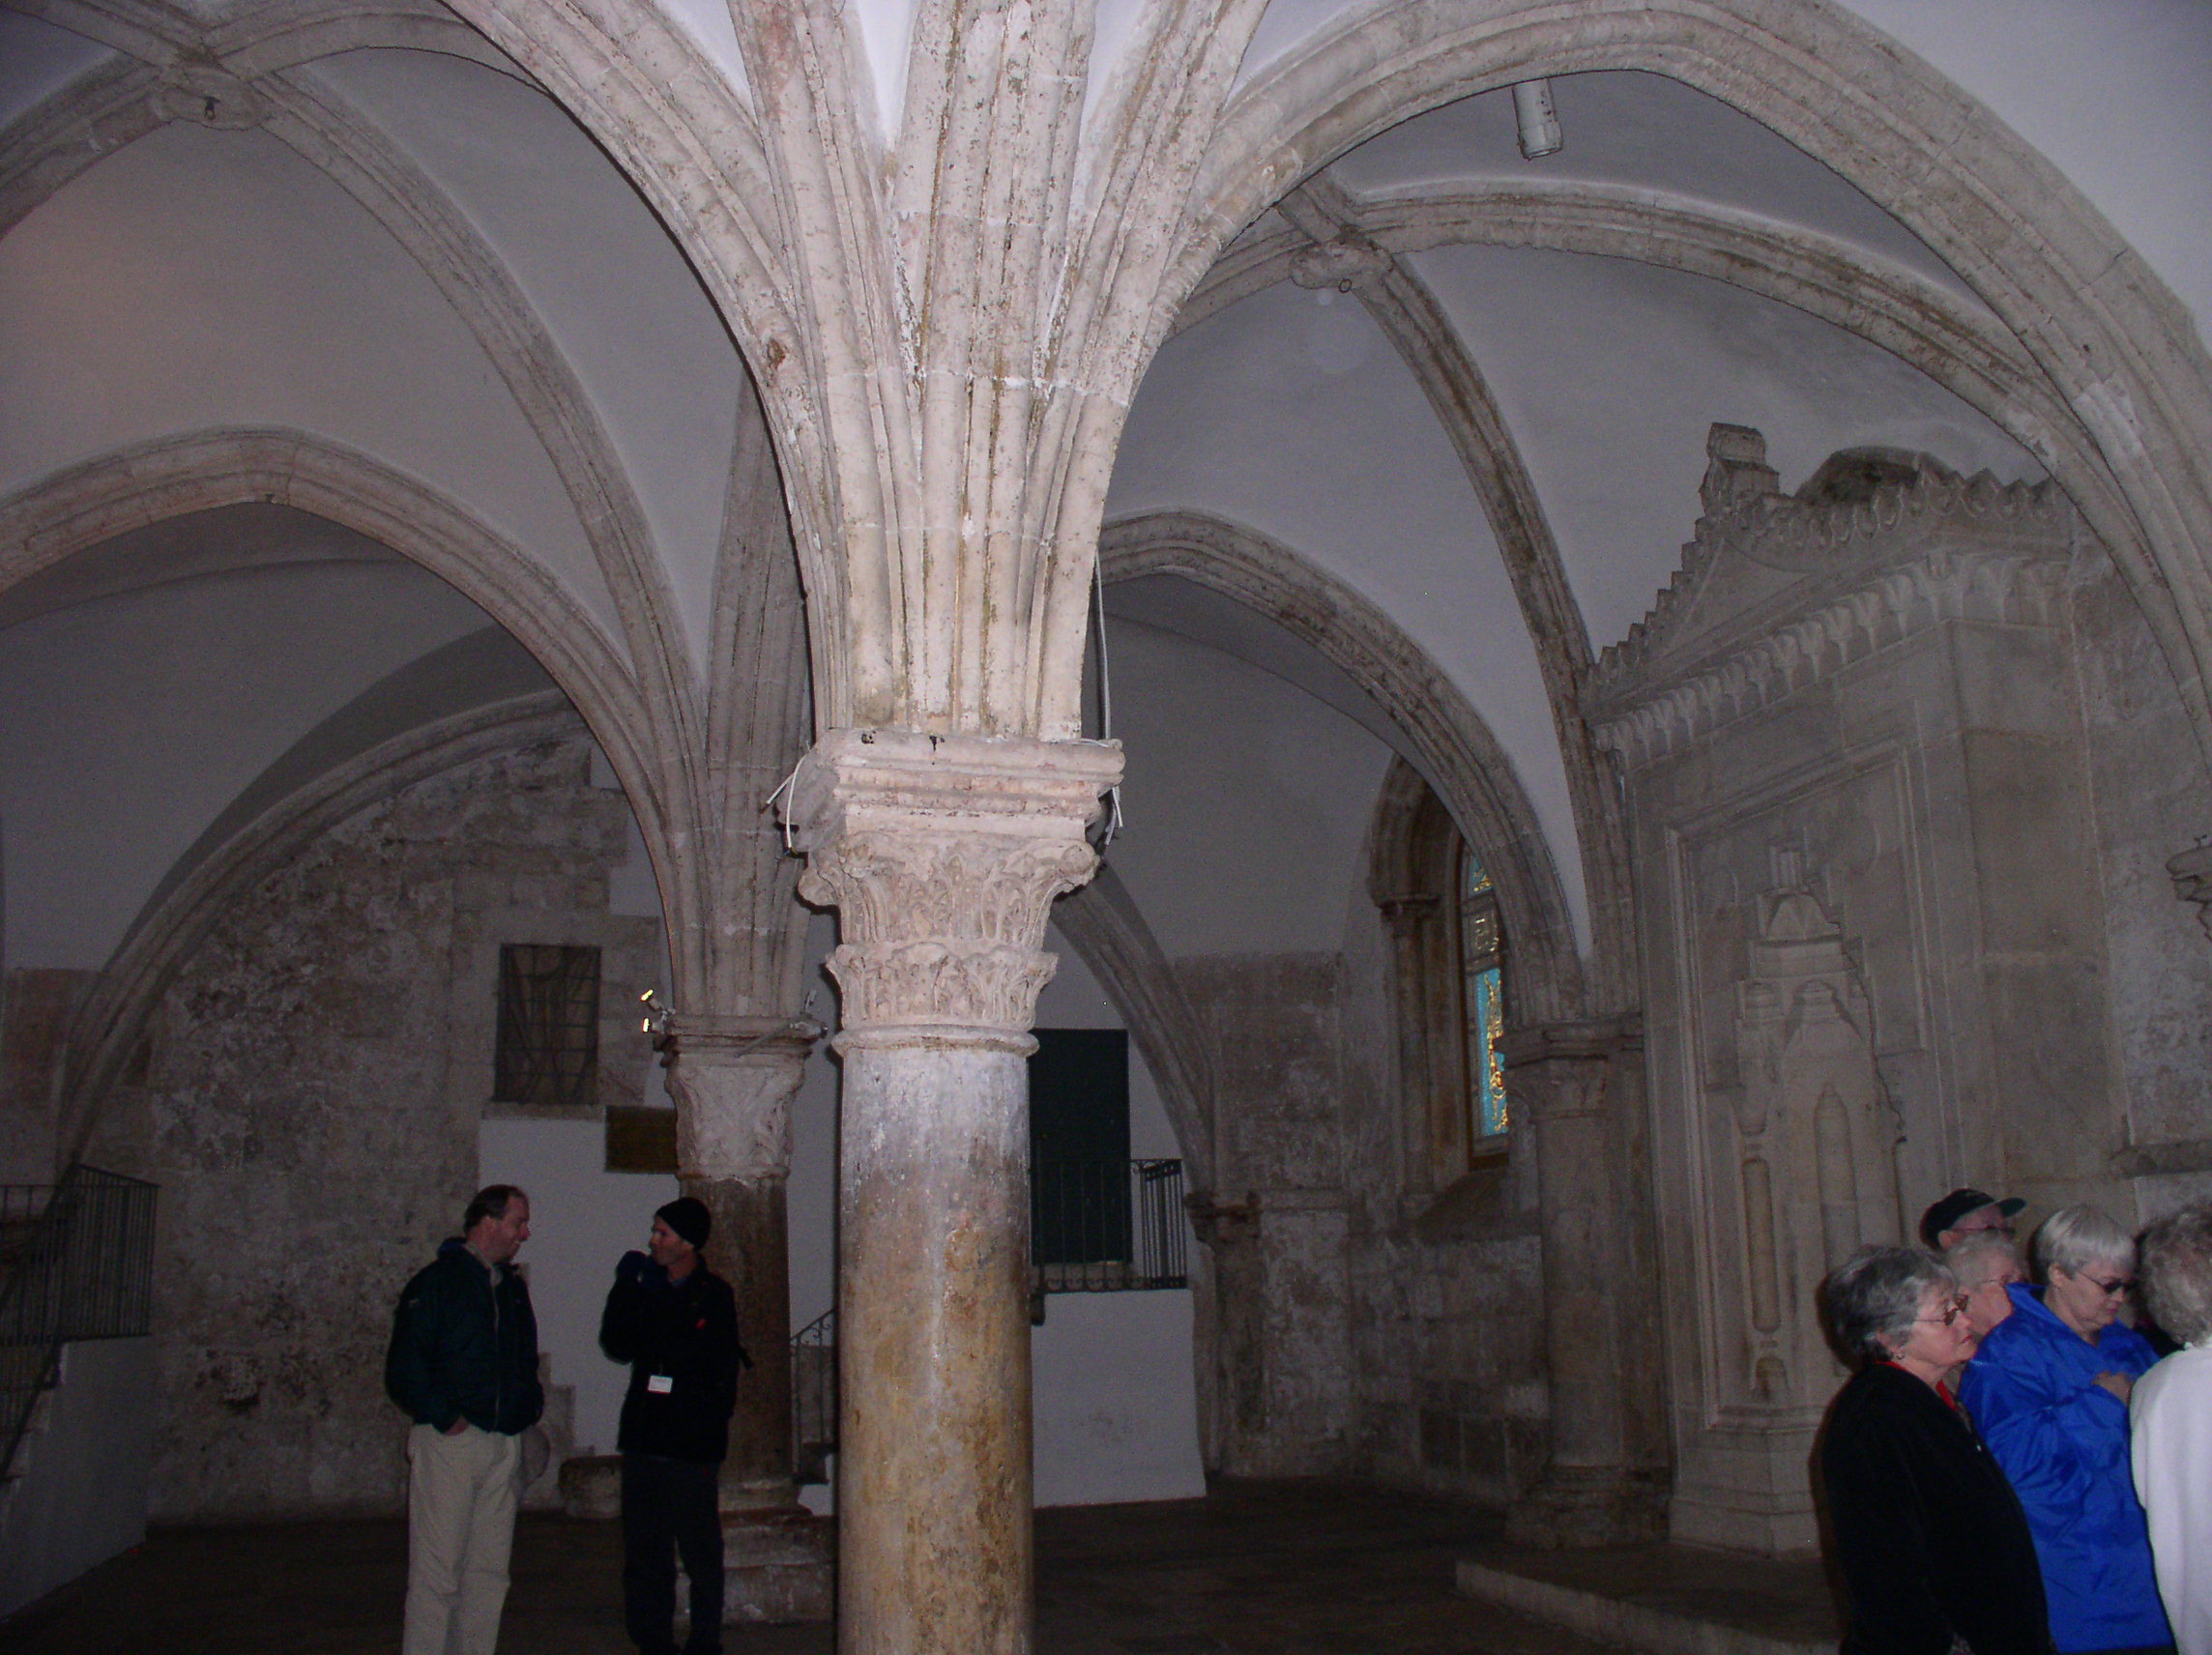 Last Supper Room (Peaked Arches)